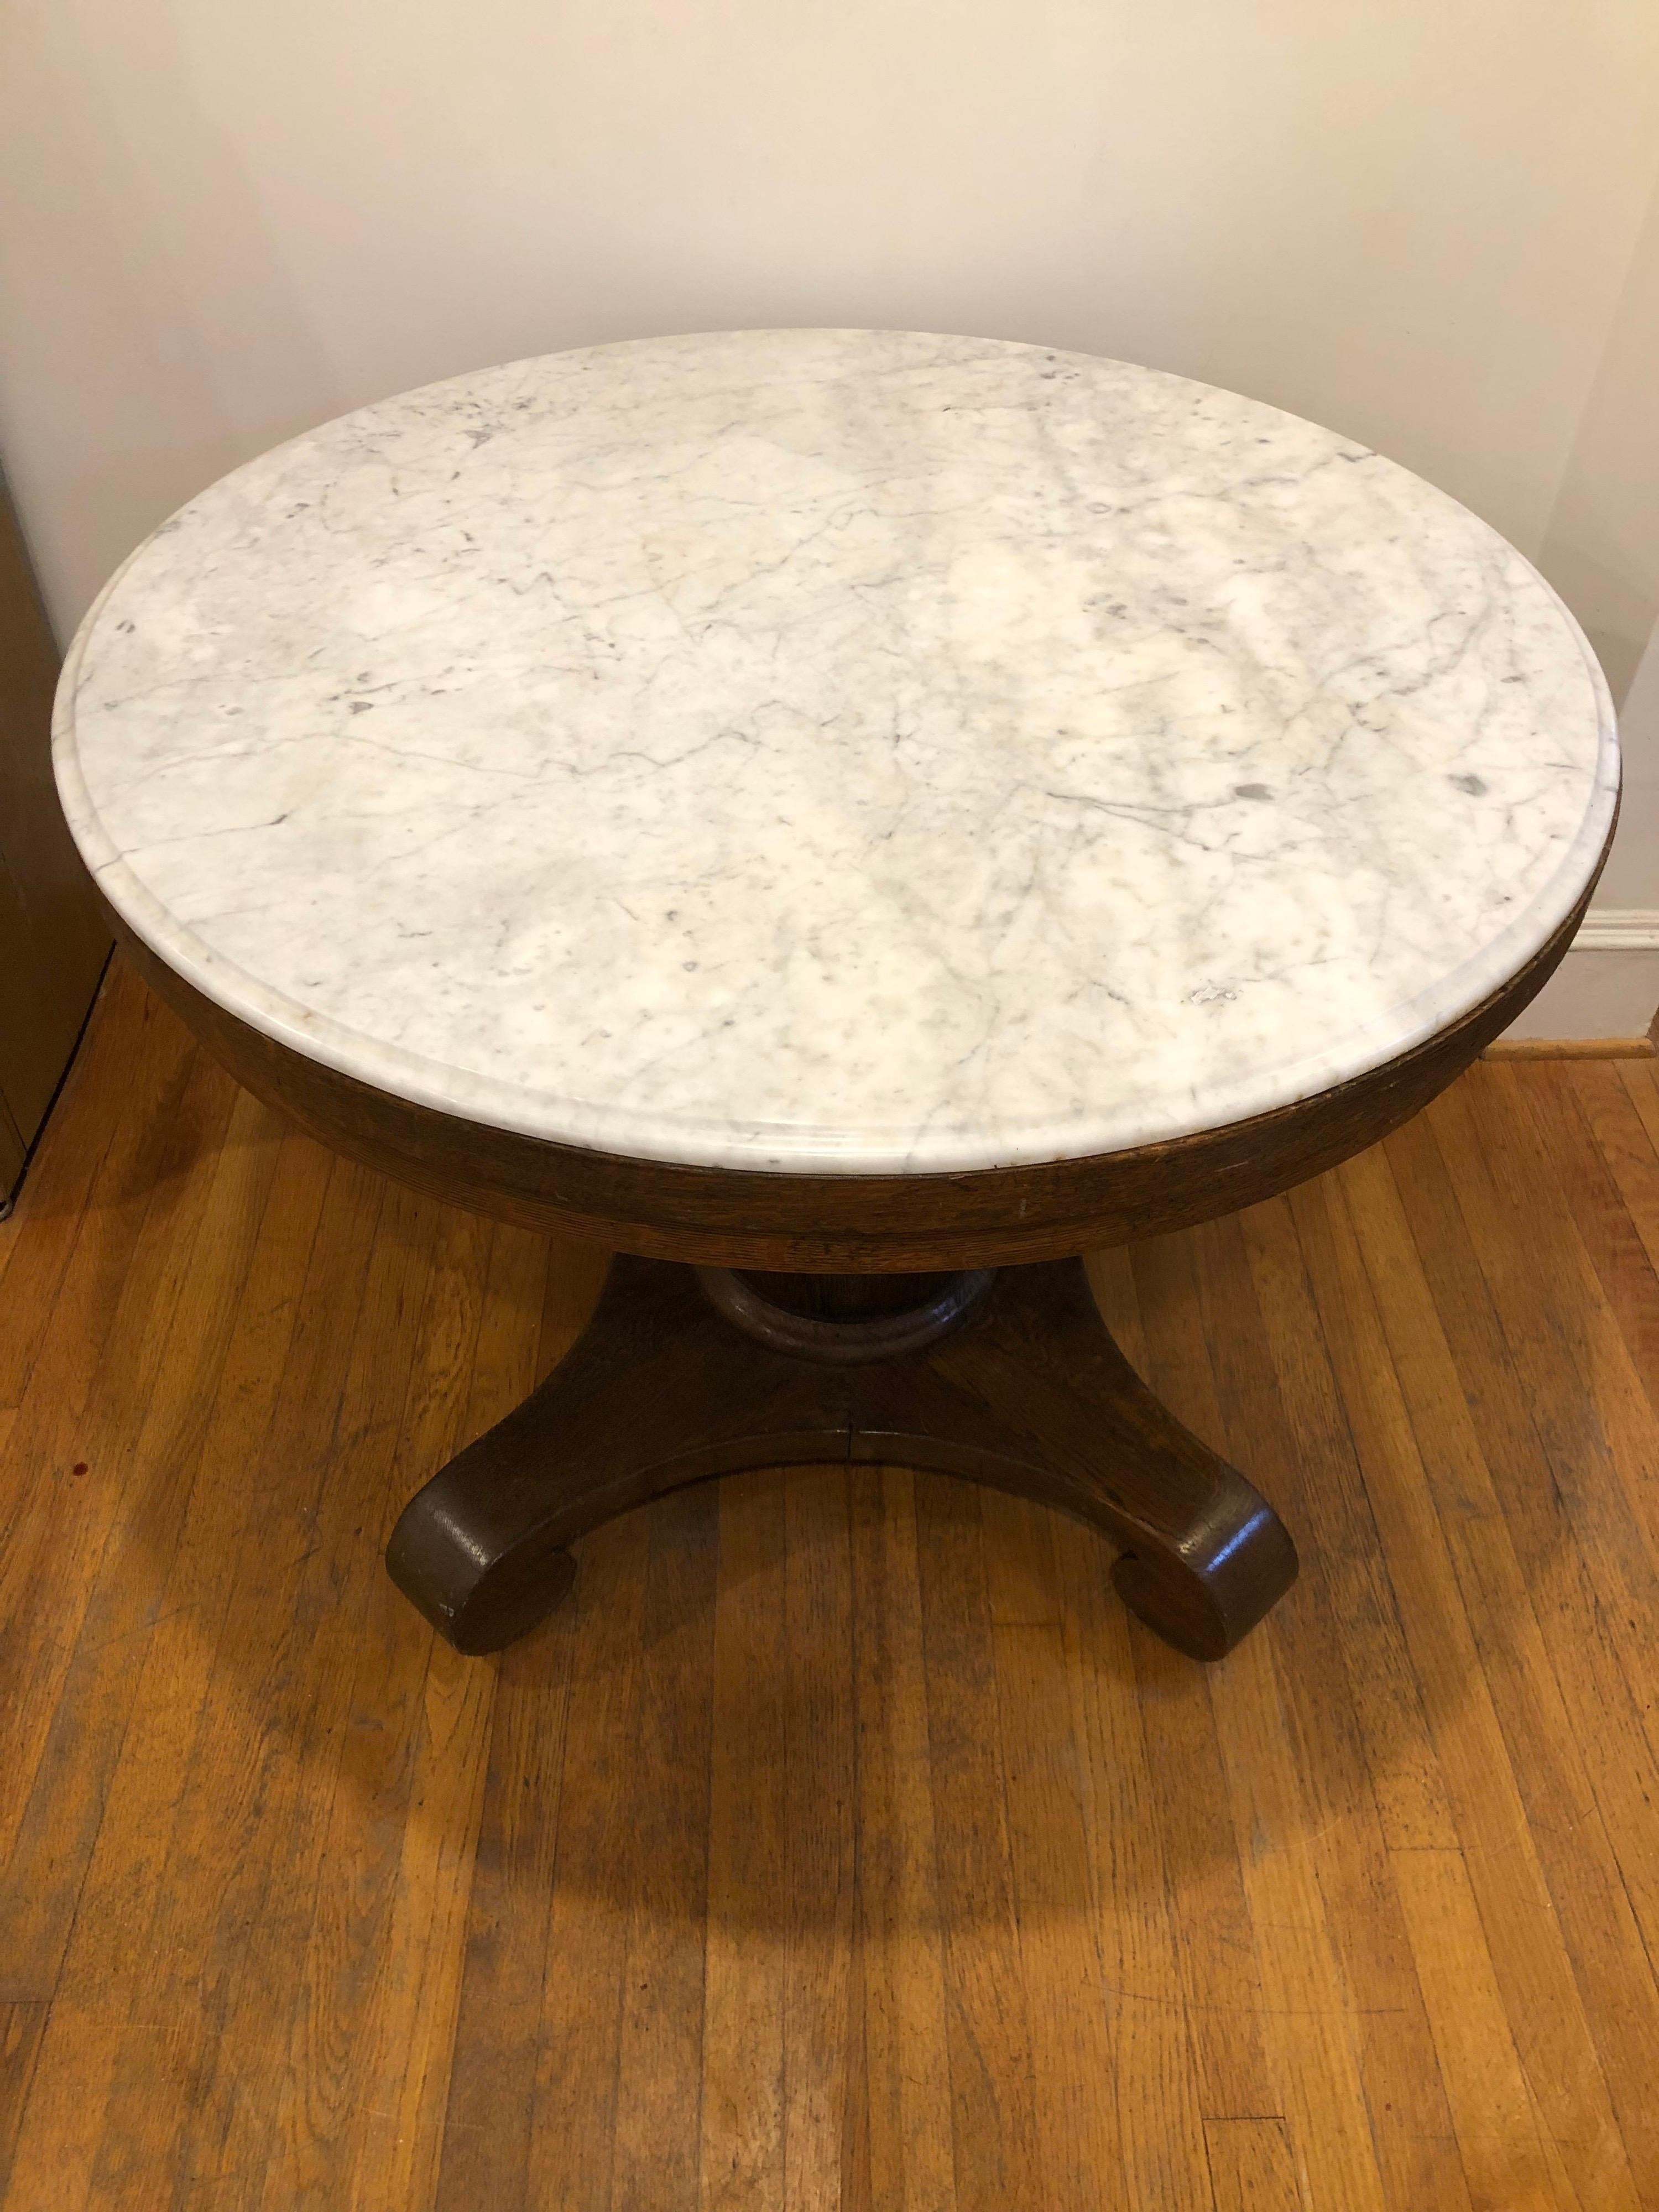 19th Century Antique English Oak Centre/Center Hall Table with Calcutta Marble Top